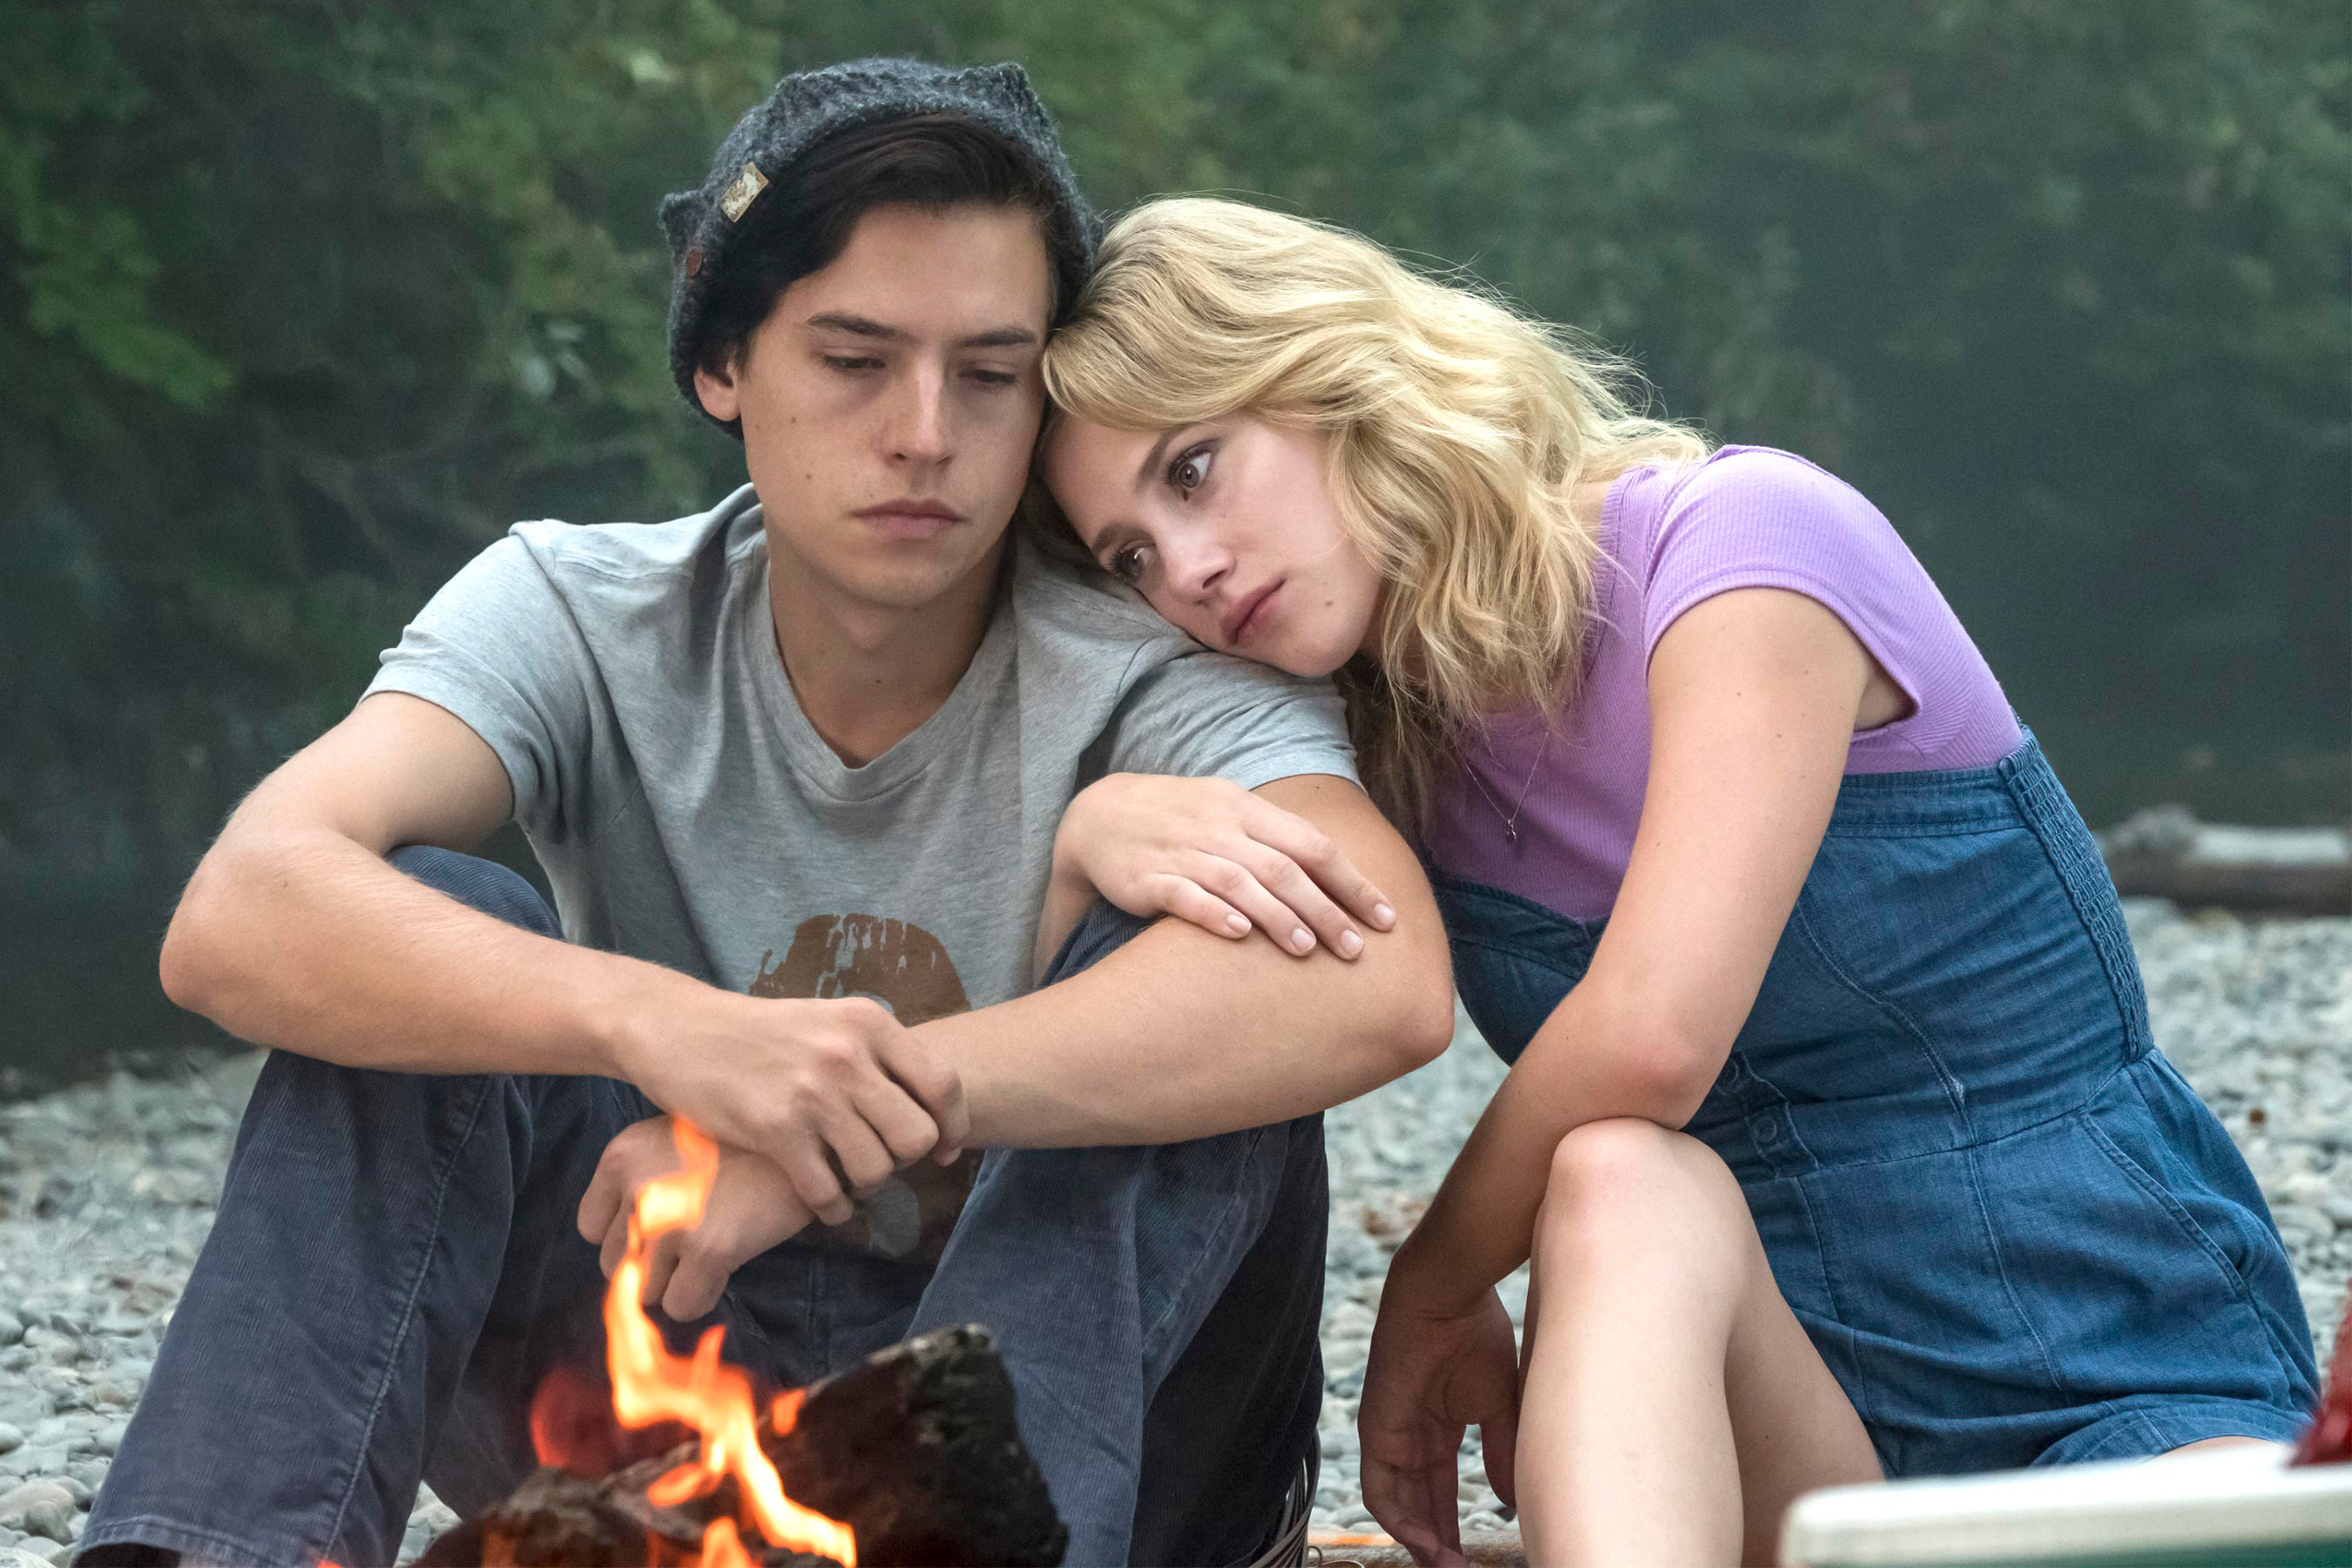 lili&#x27;s character putting her head on cole&#x27;s shoulder in front of a fire